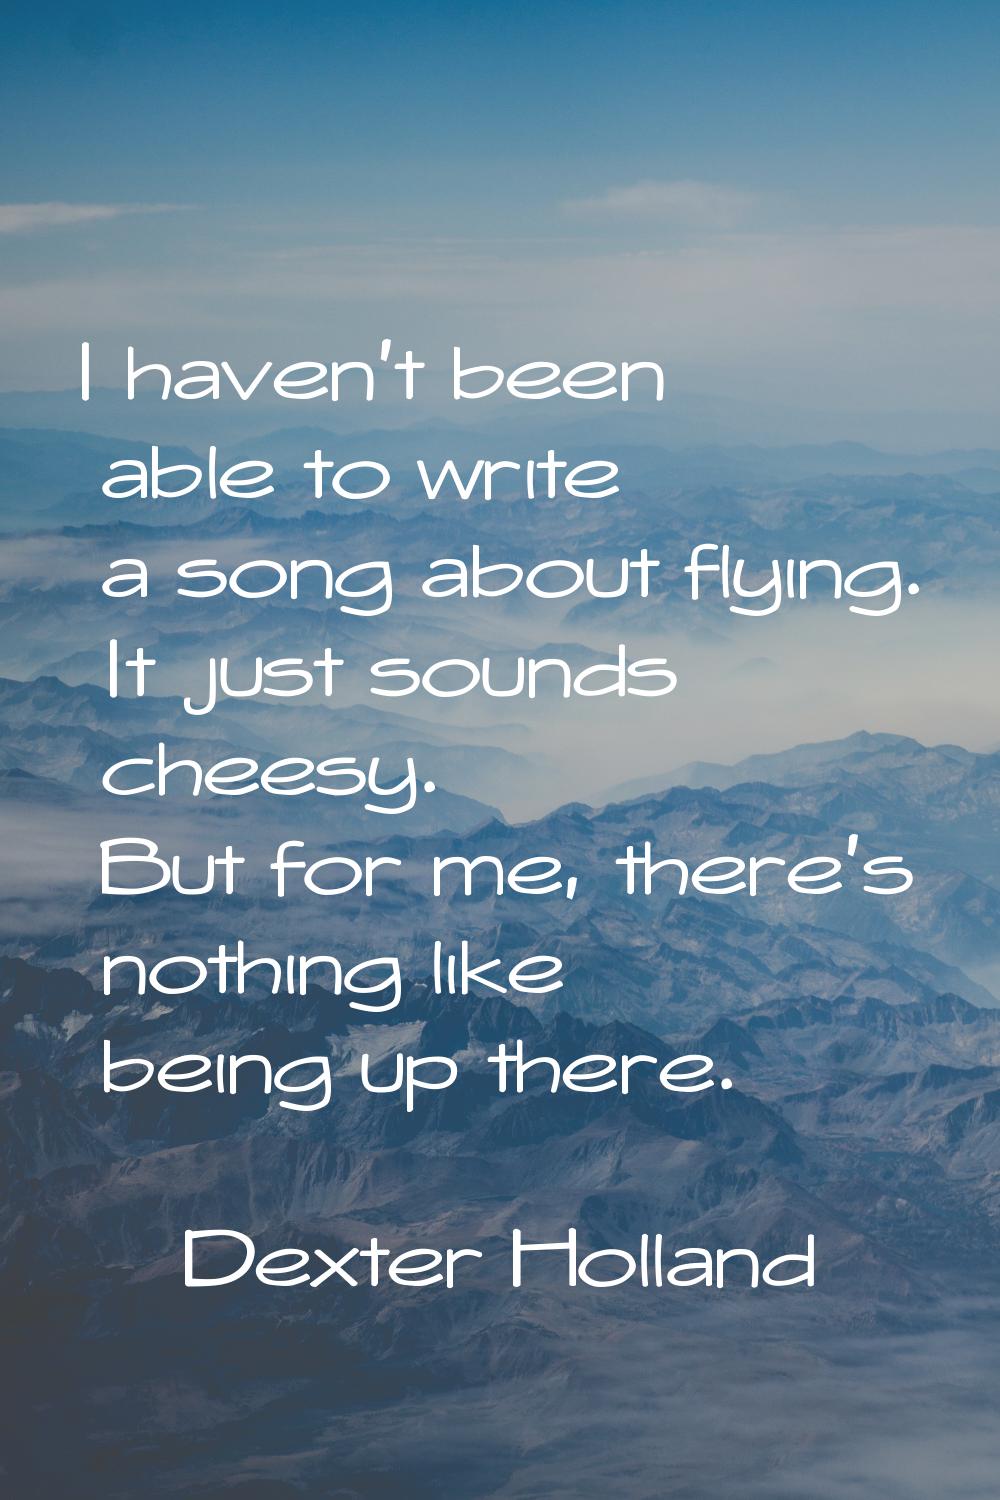 I haven't been able to write a song about flying. It just sounds cheesy. But for me, there's nothin